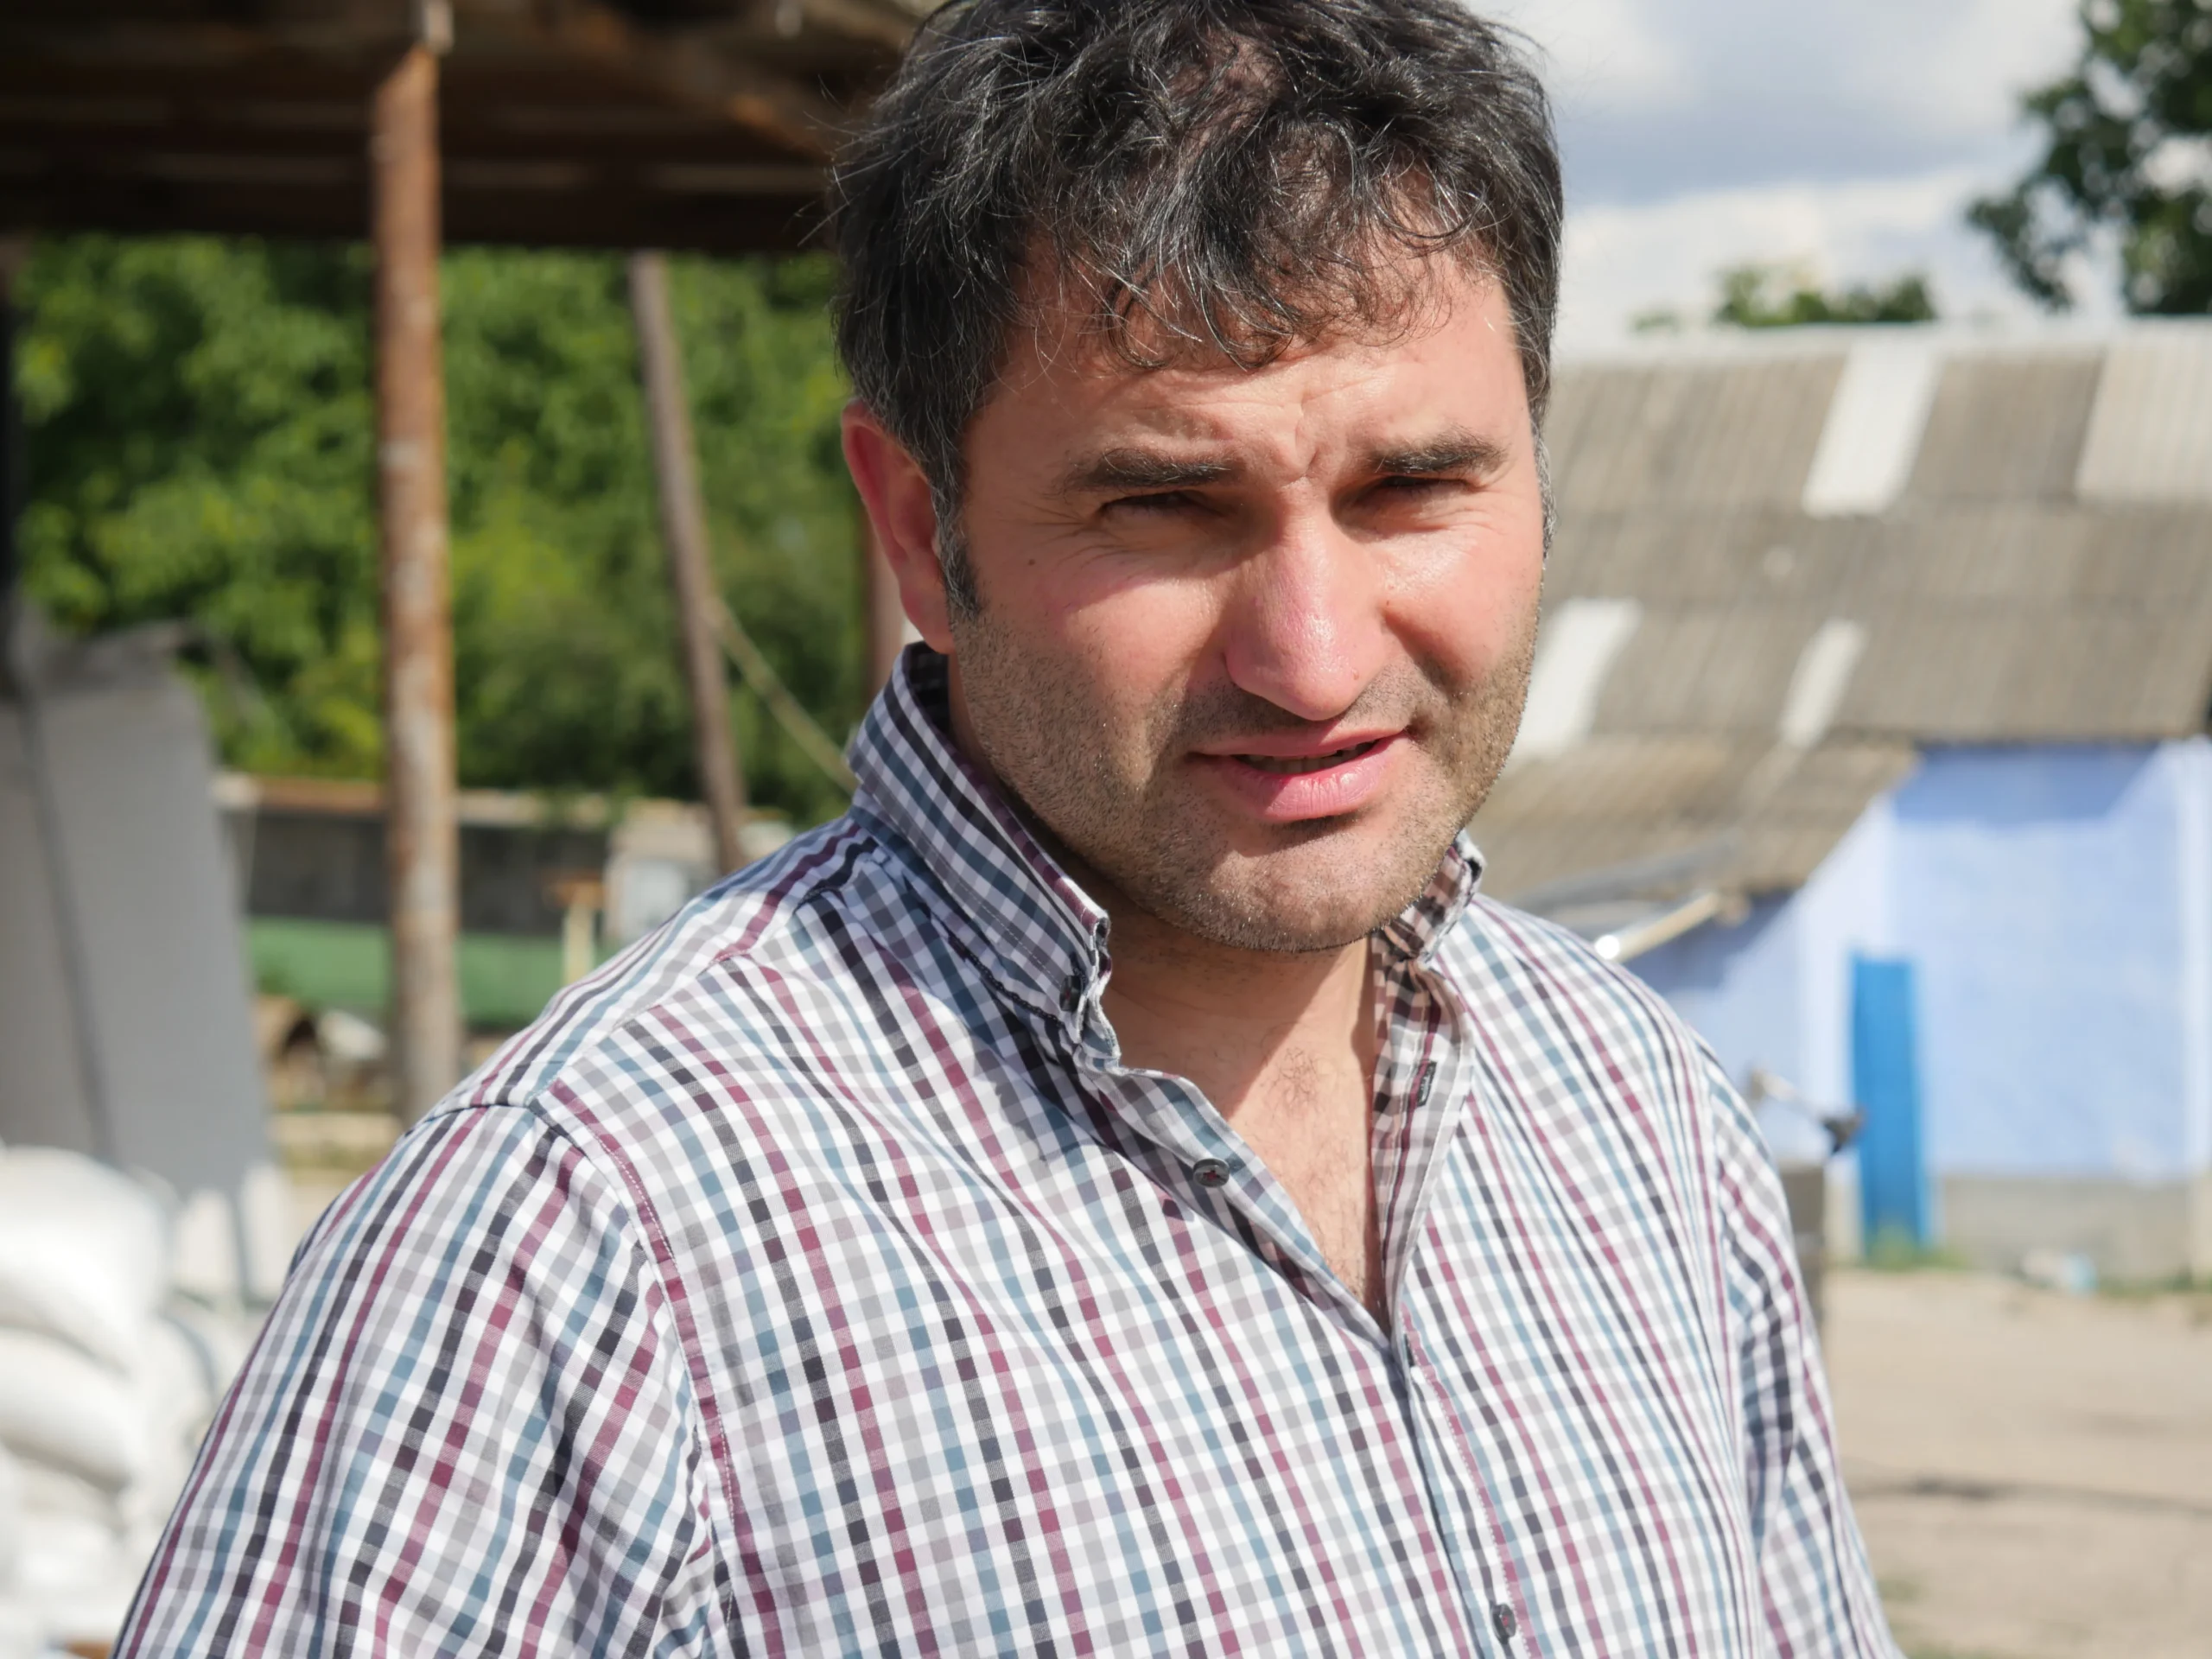 Eco producer Alexei Micu had harsh predictions for Moldovan agriculture if help is not coming soon.